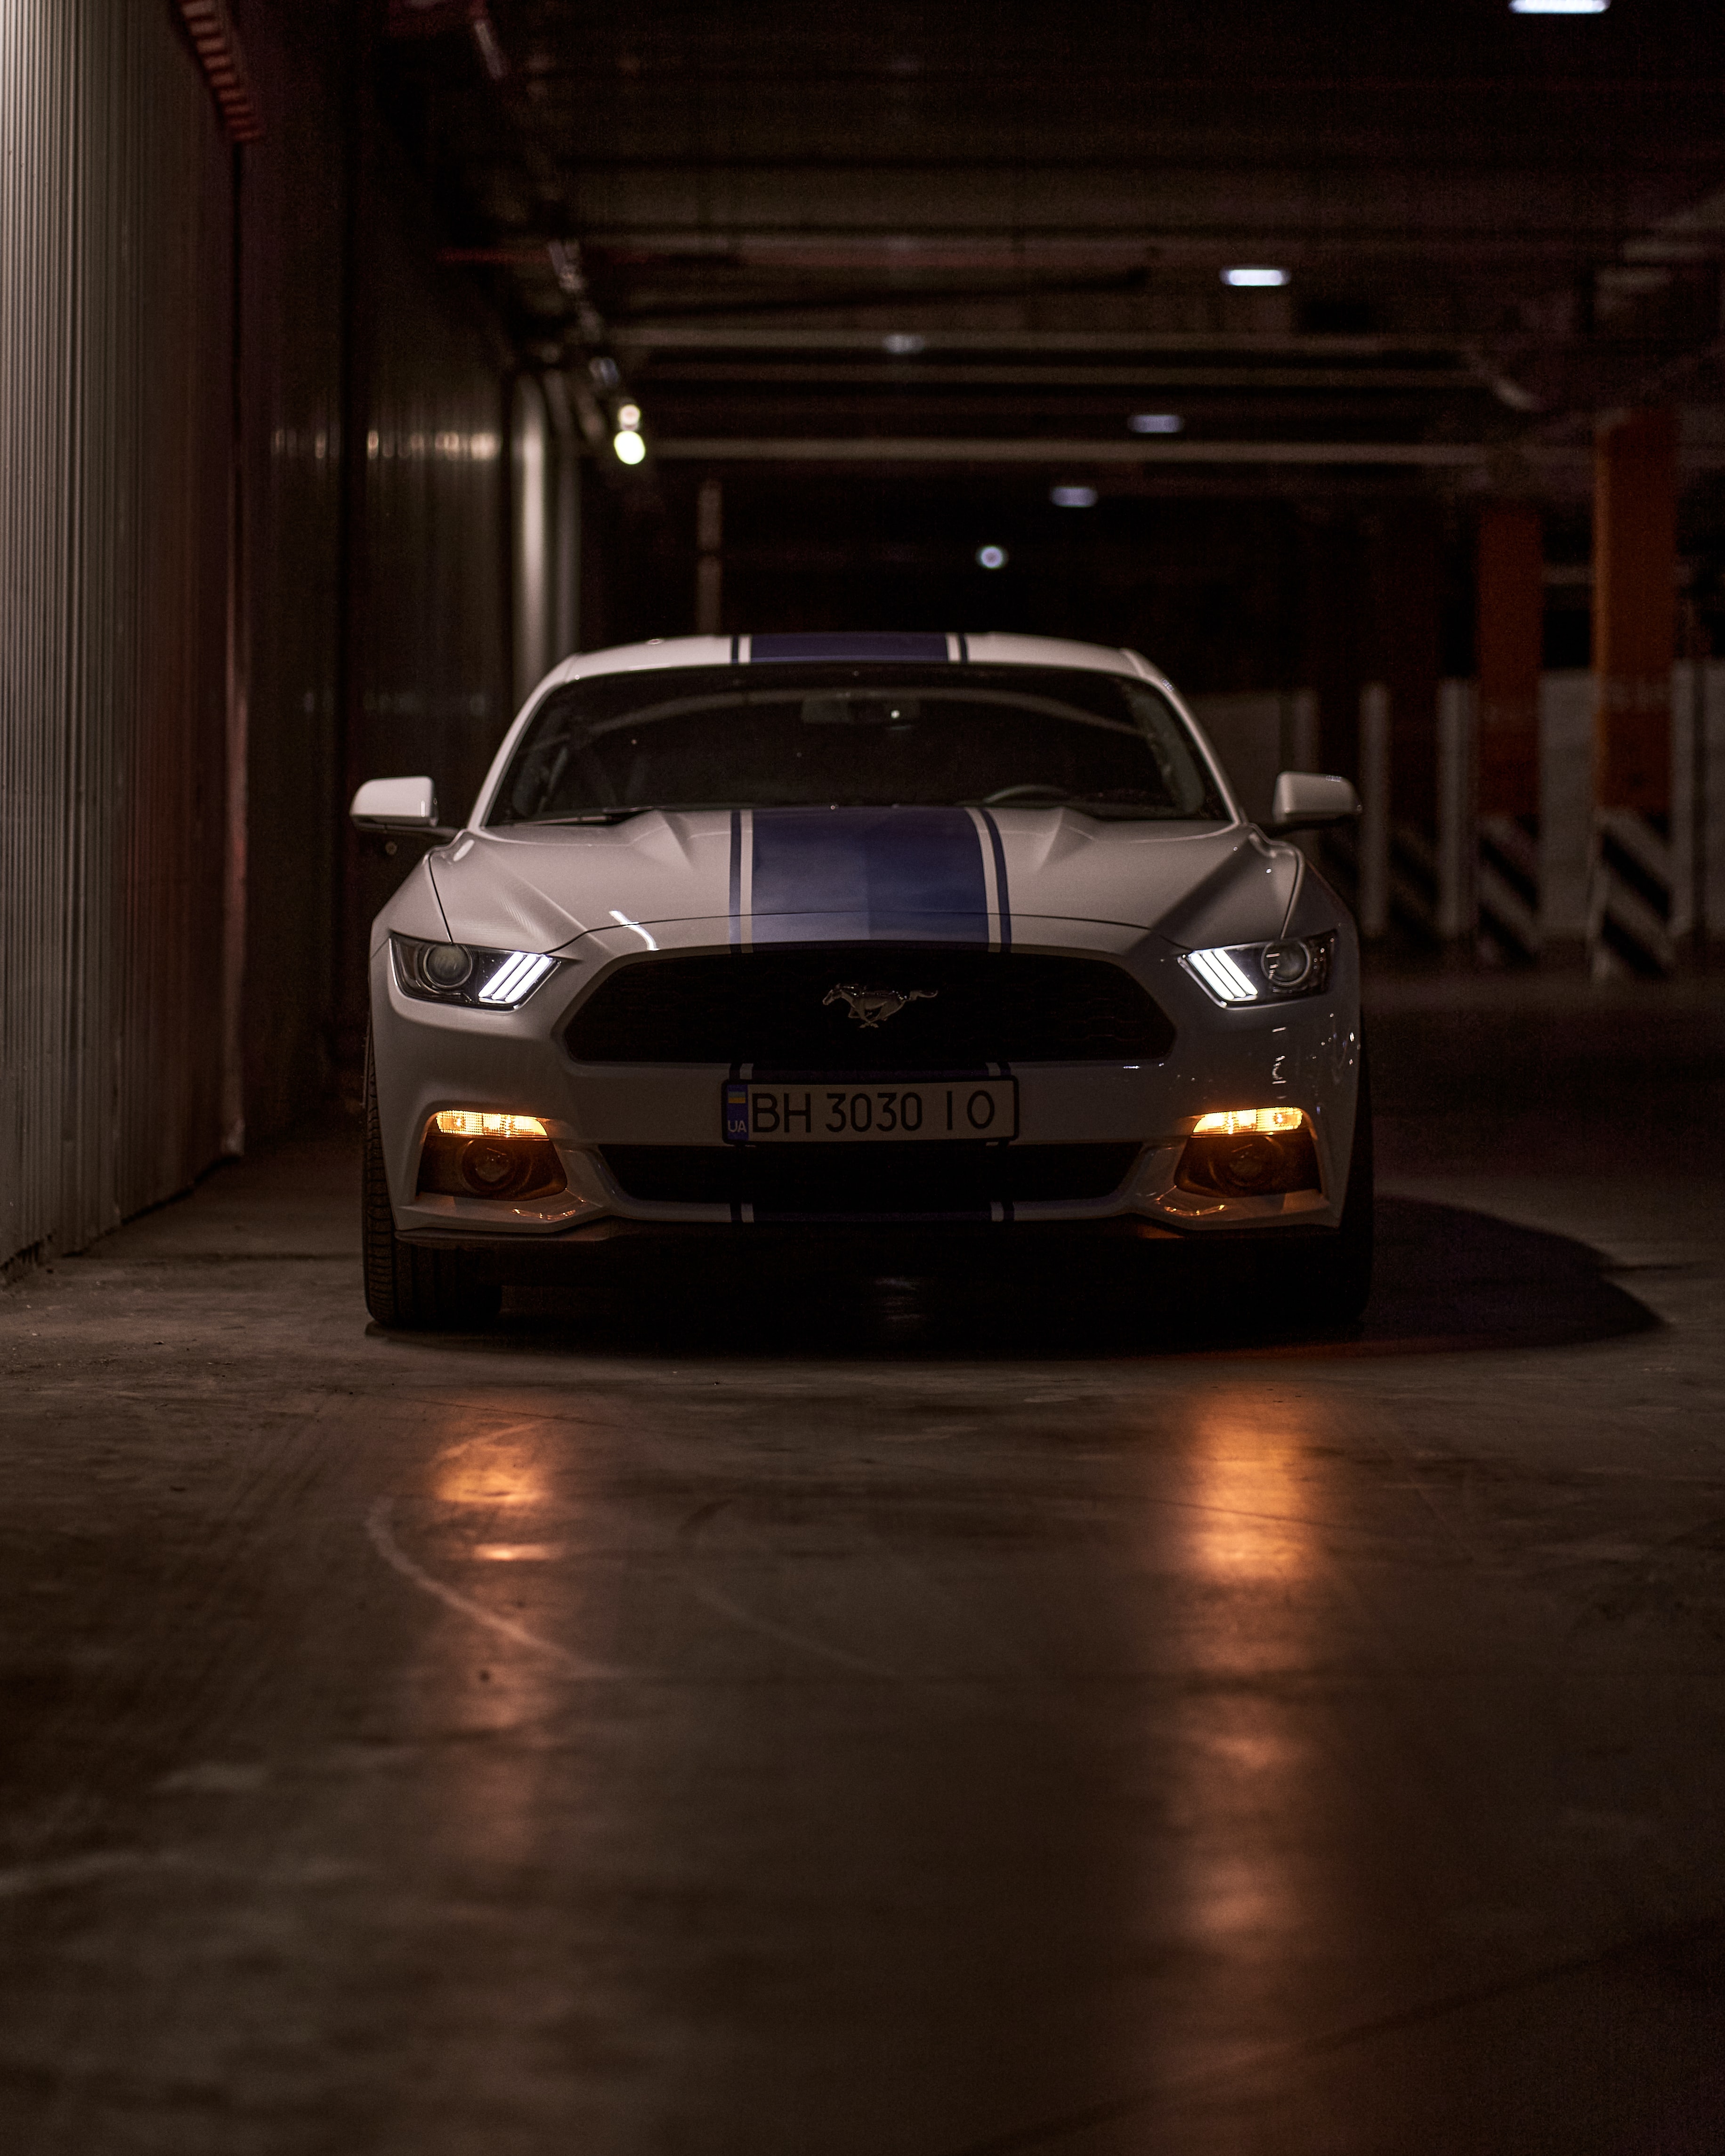 mustang, cars, car, front view, sports car, mustang gt, lights, headlights, sports